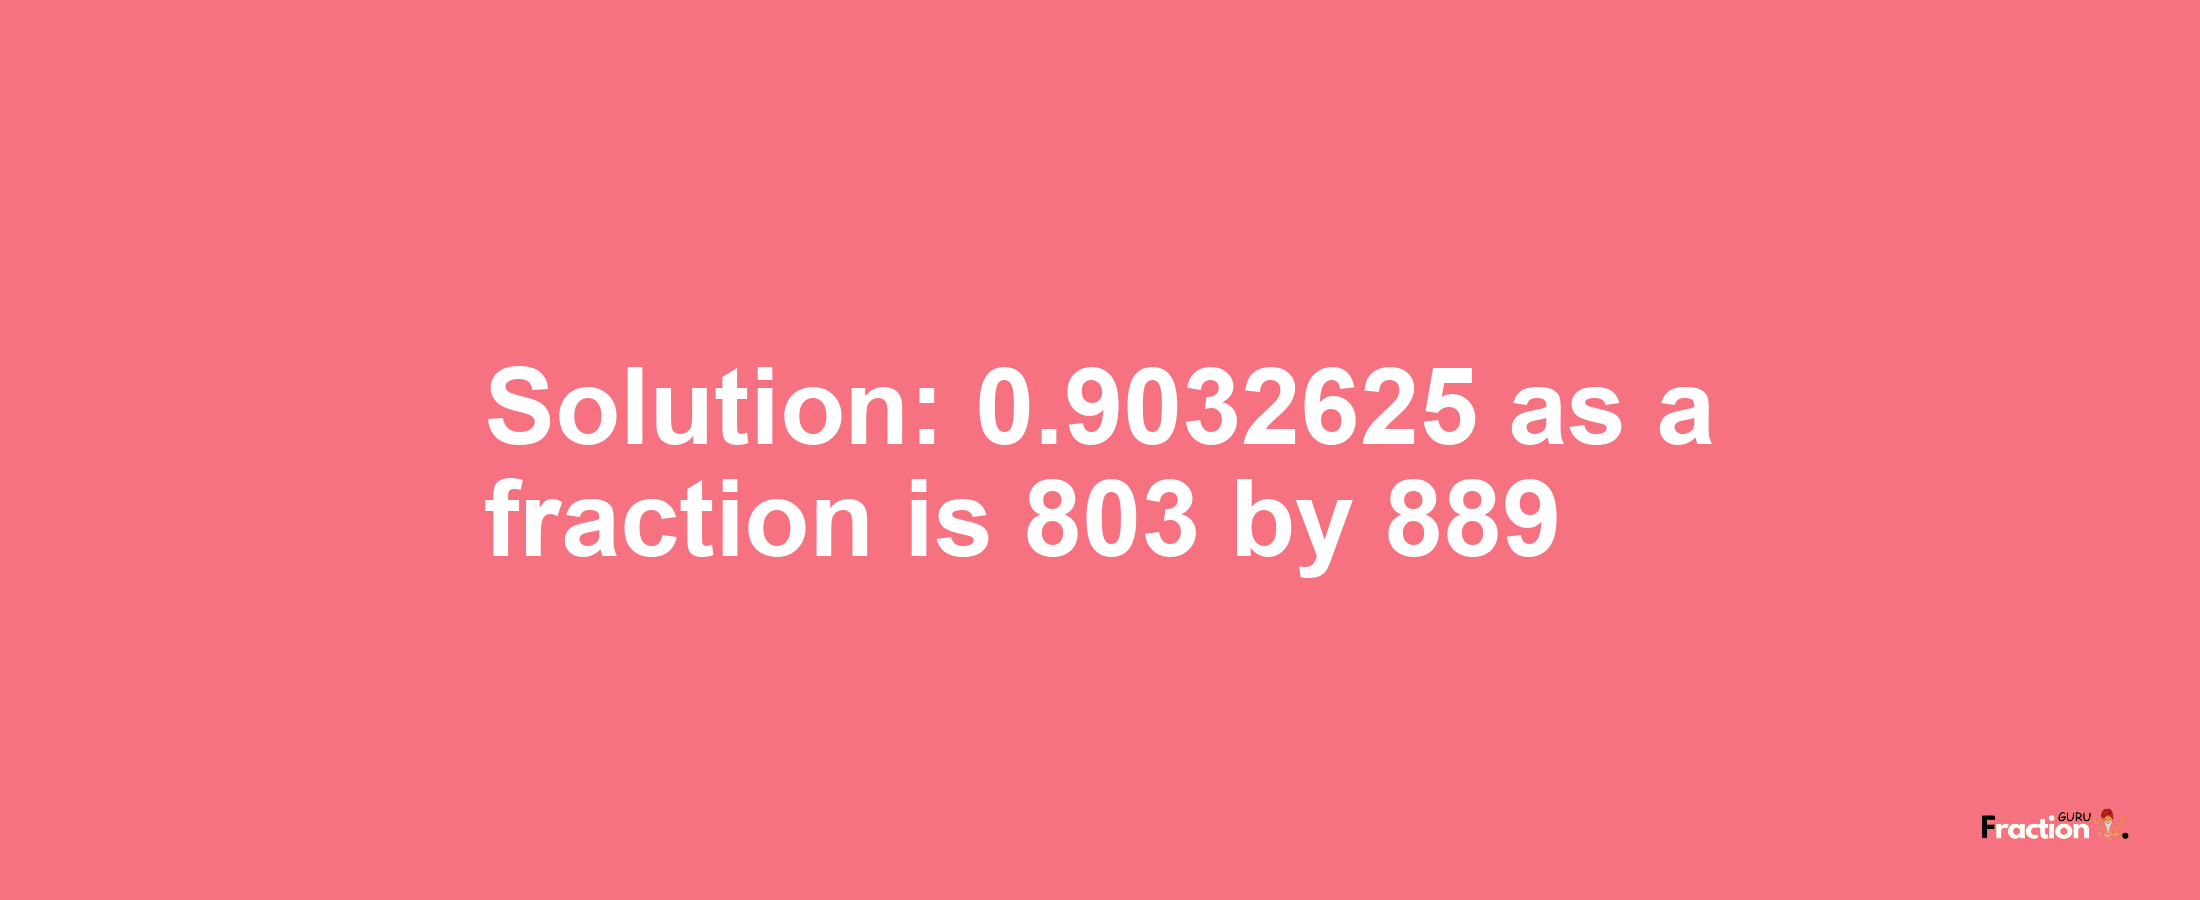 Solution:0.9032625 as a fraction is 803/889